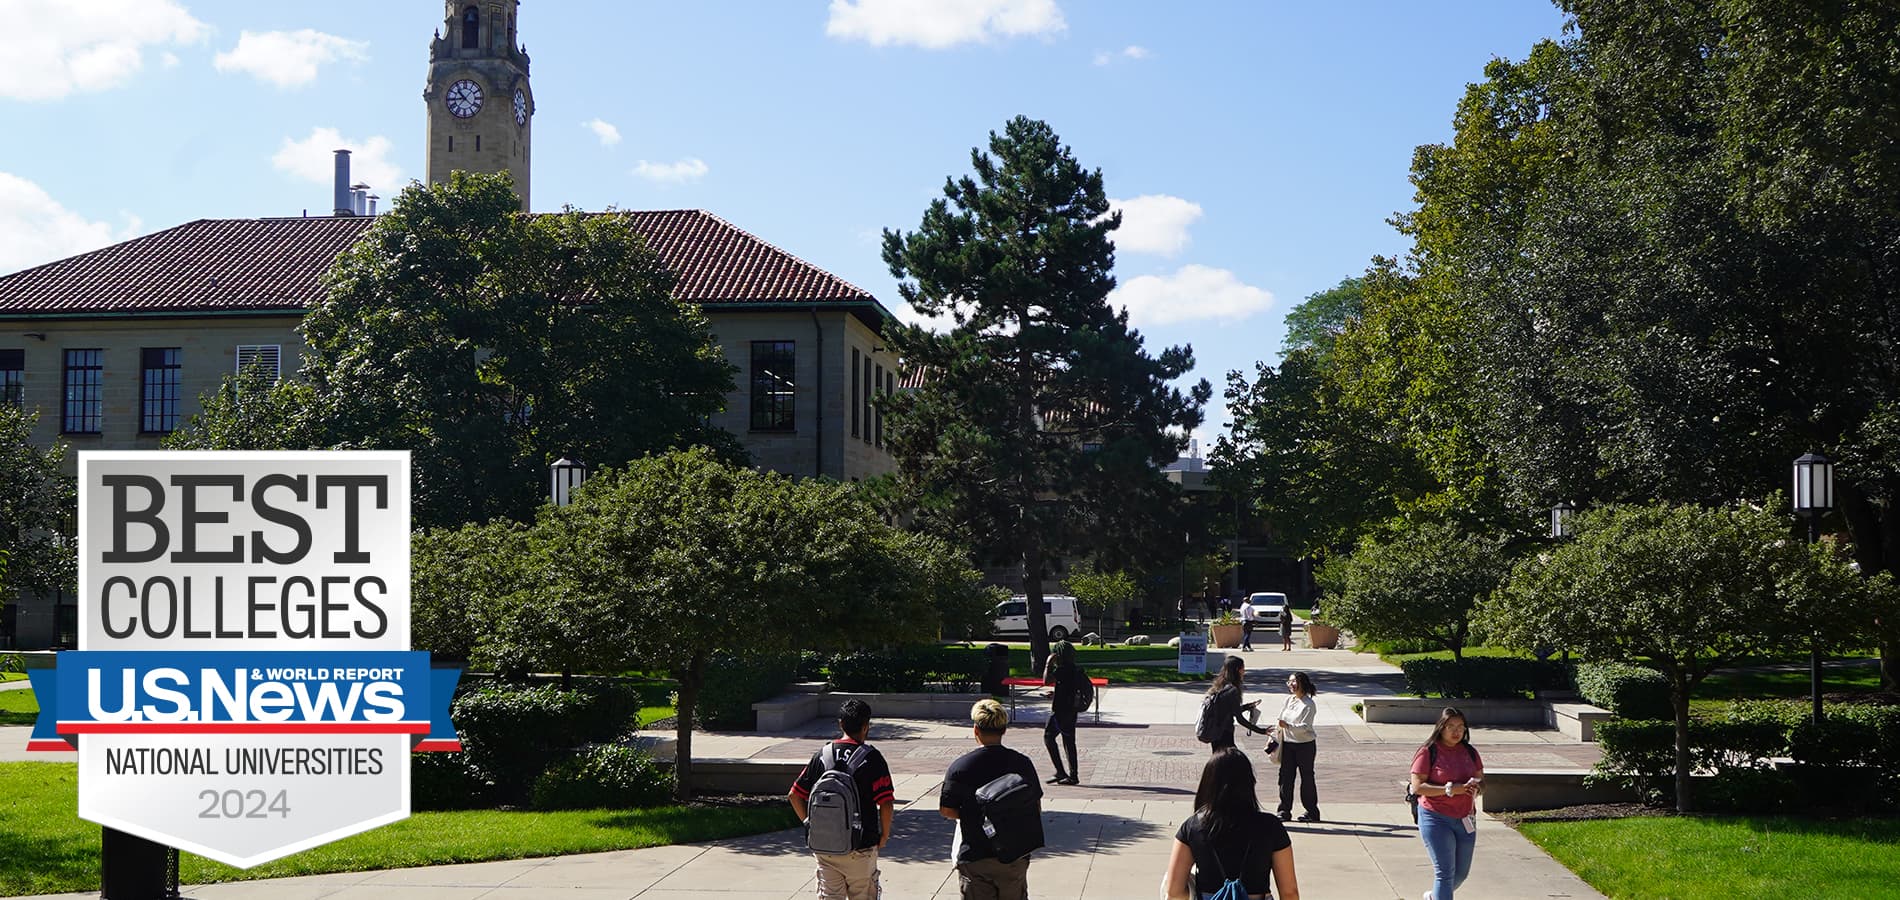 An outdoor photo of the McNichols Campus on a sunny day with students walking on campus amongst trees, buildings and a clock tower.